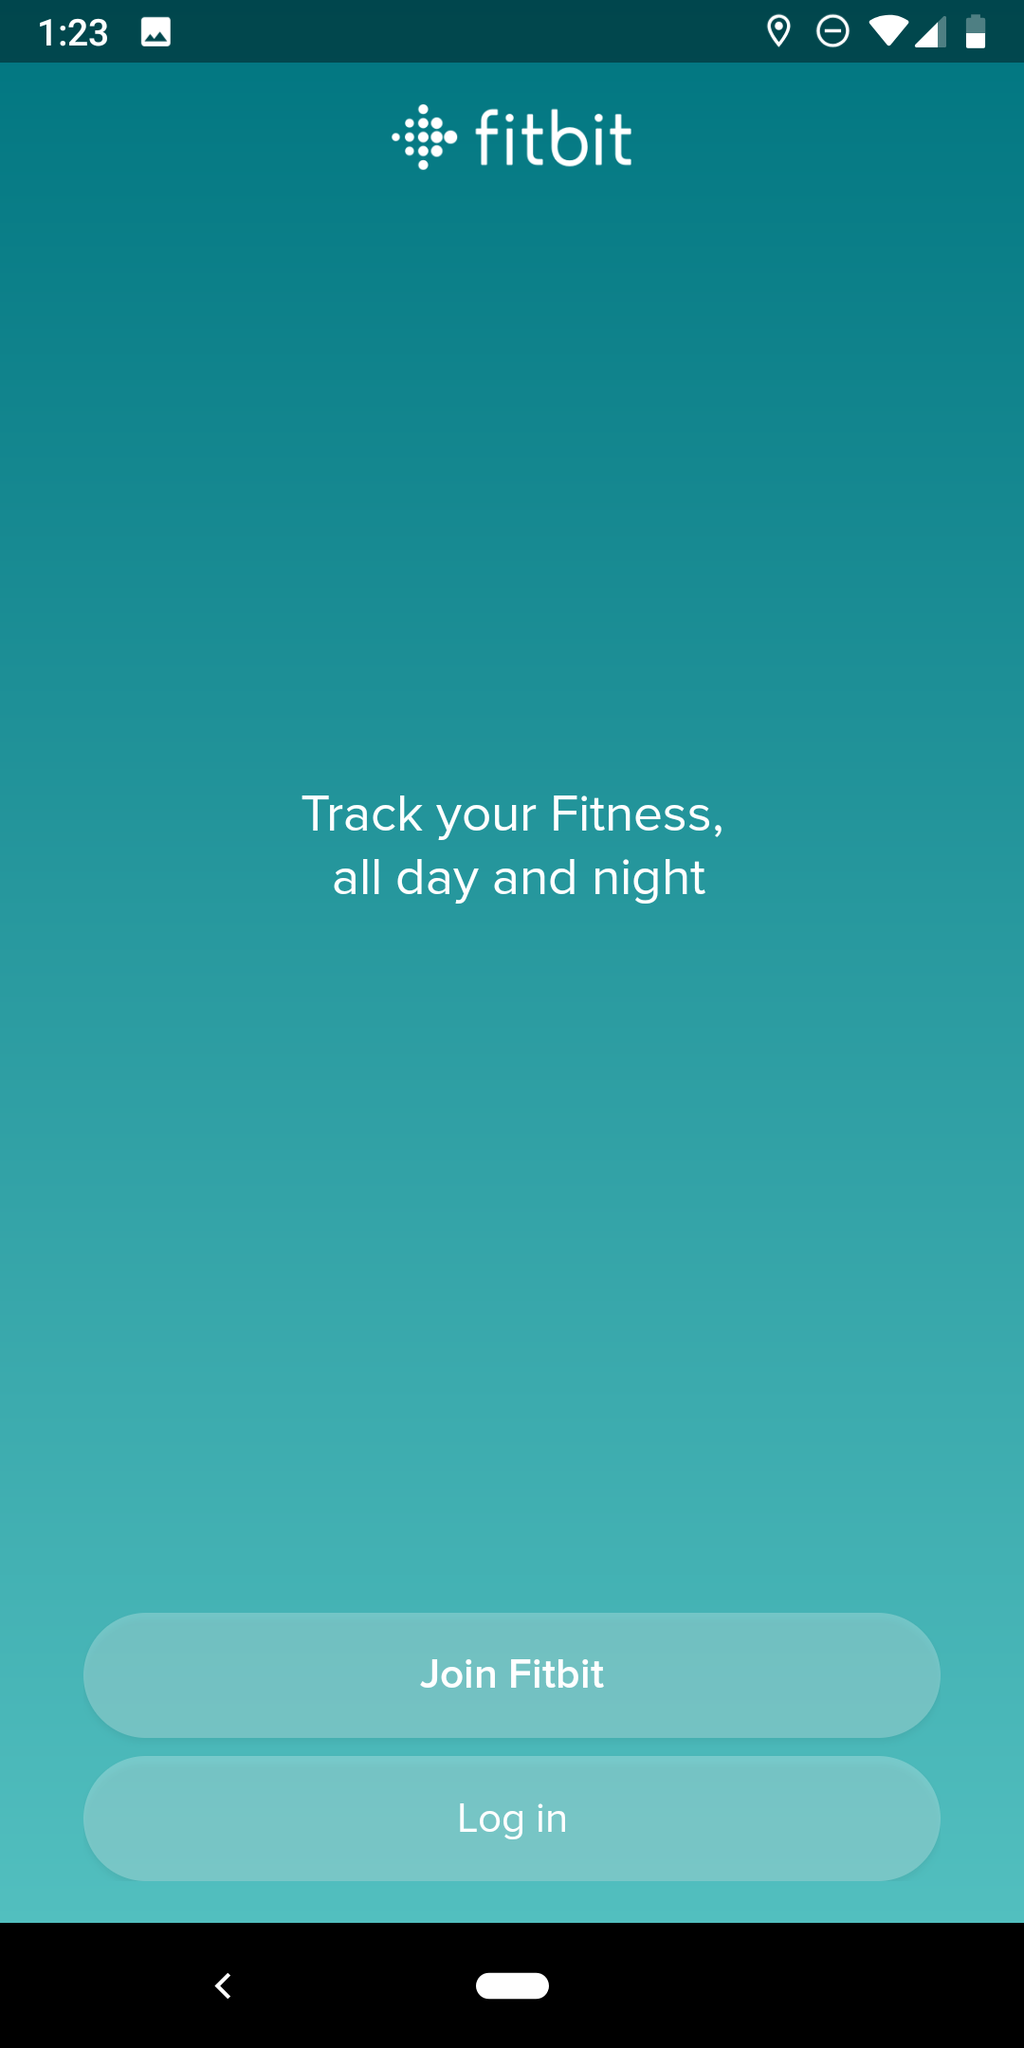 fitbit sign in page